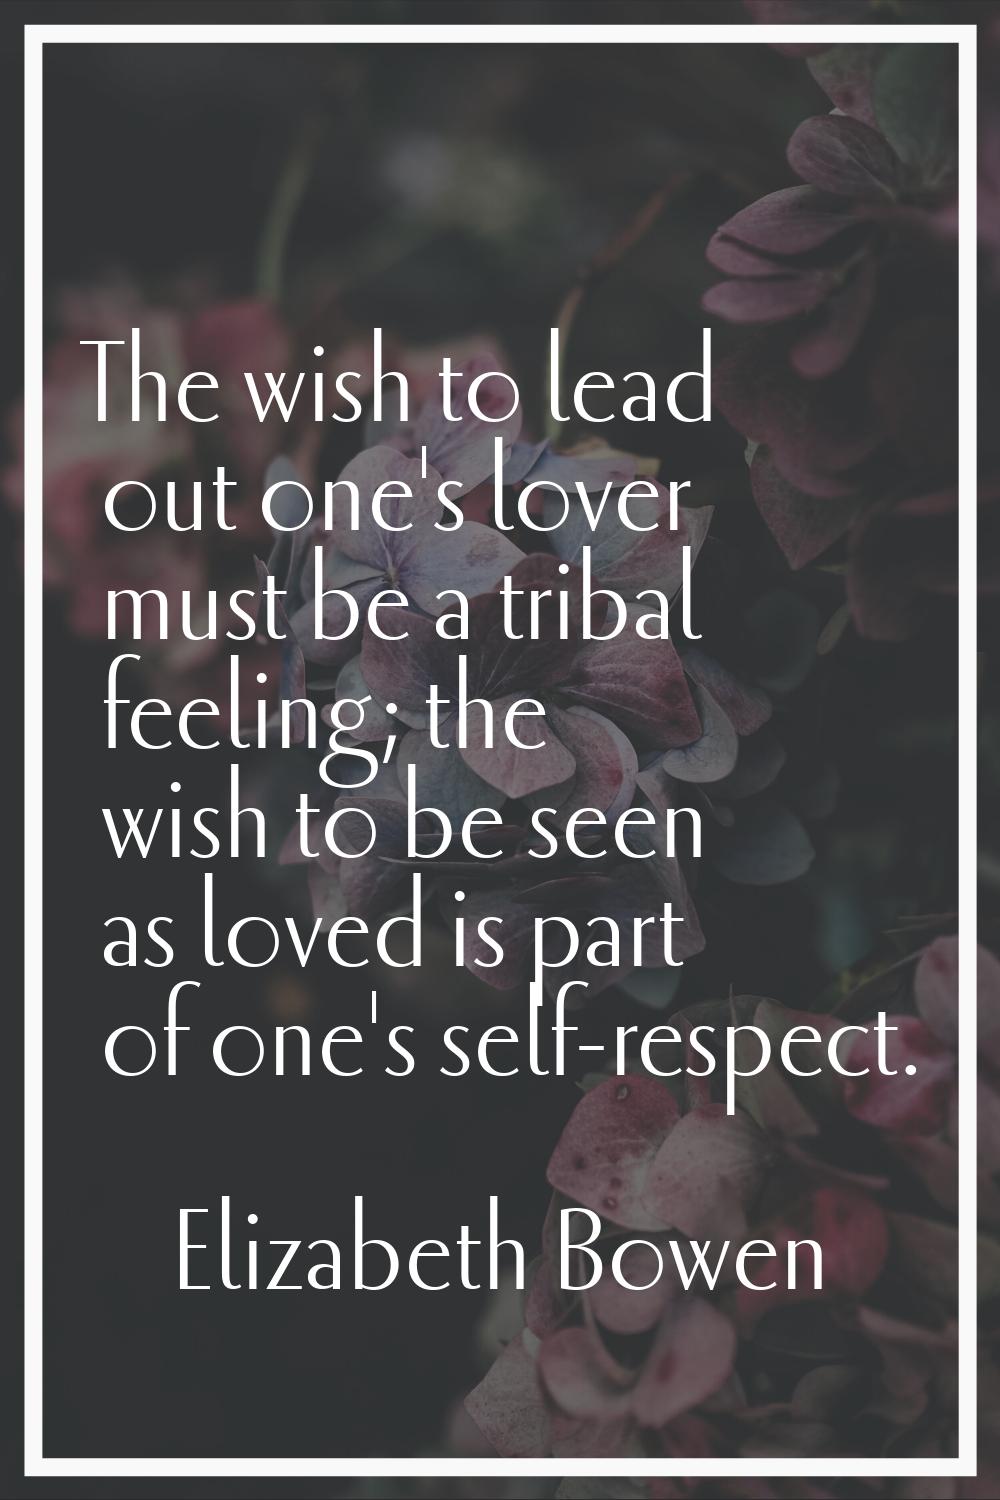 The wish to lead out one's lover must be a tribal feeling; the wish to be seen as loved is part of 